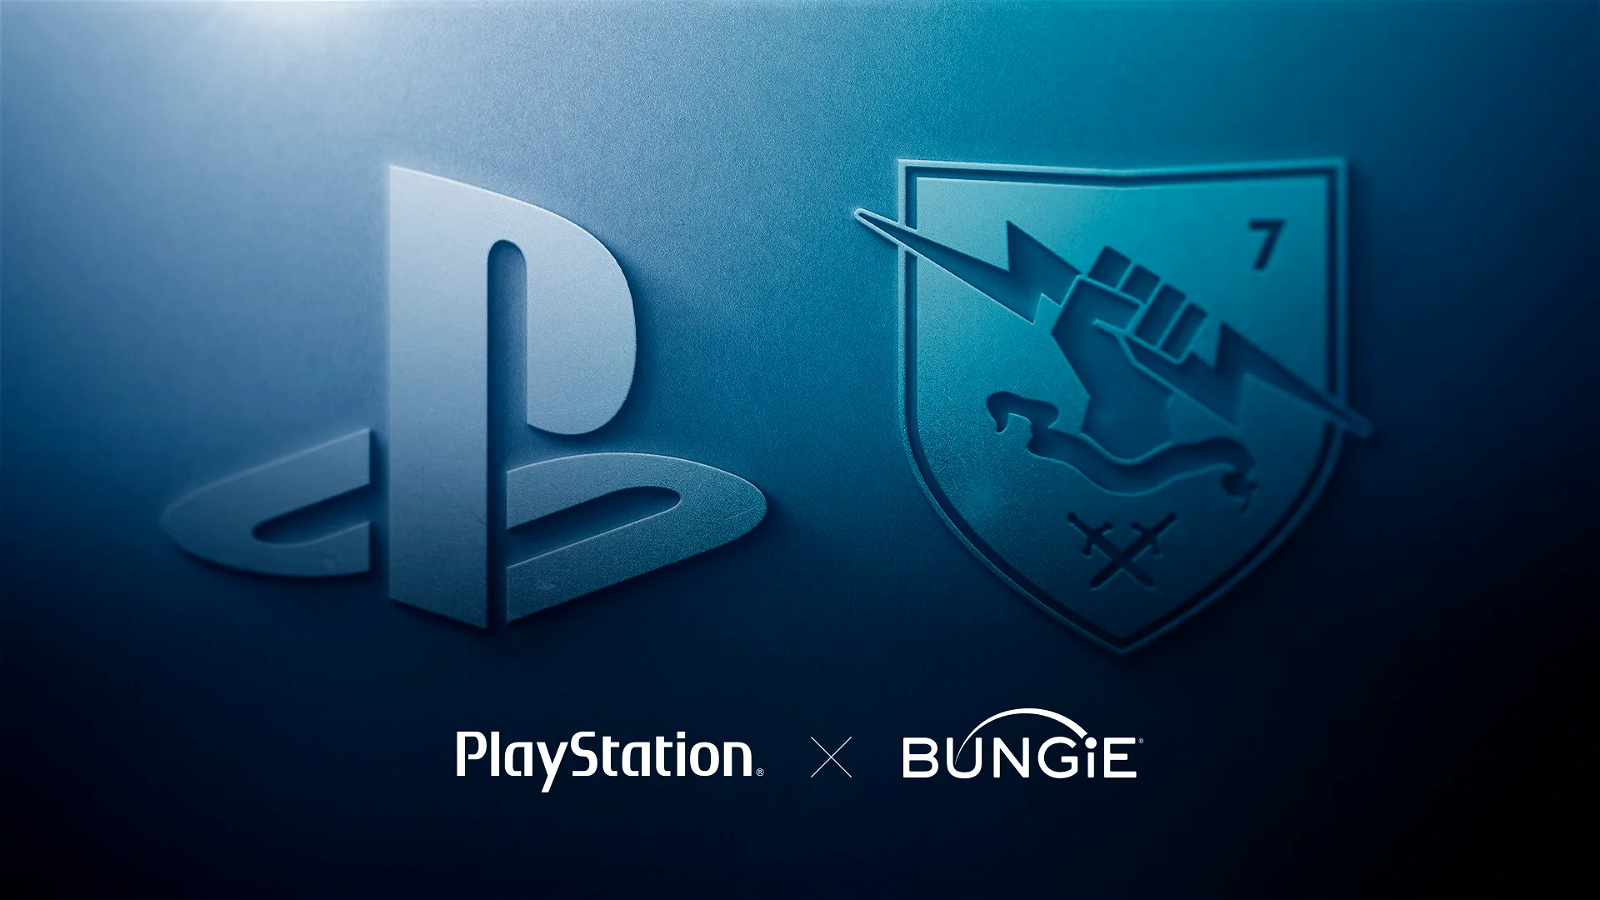 PlayStation completed the Bungie acquisition back in July of last year